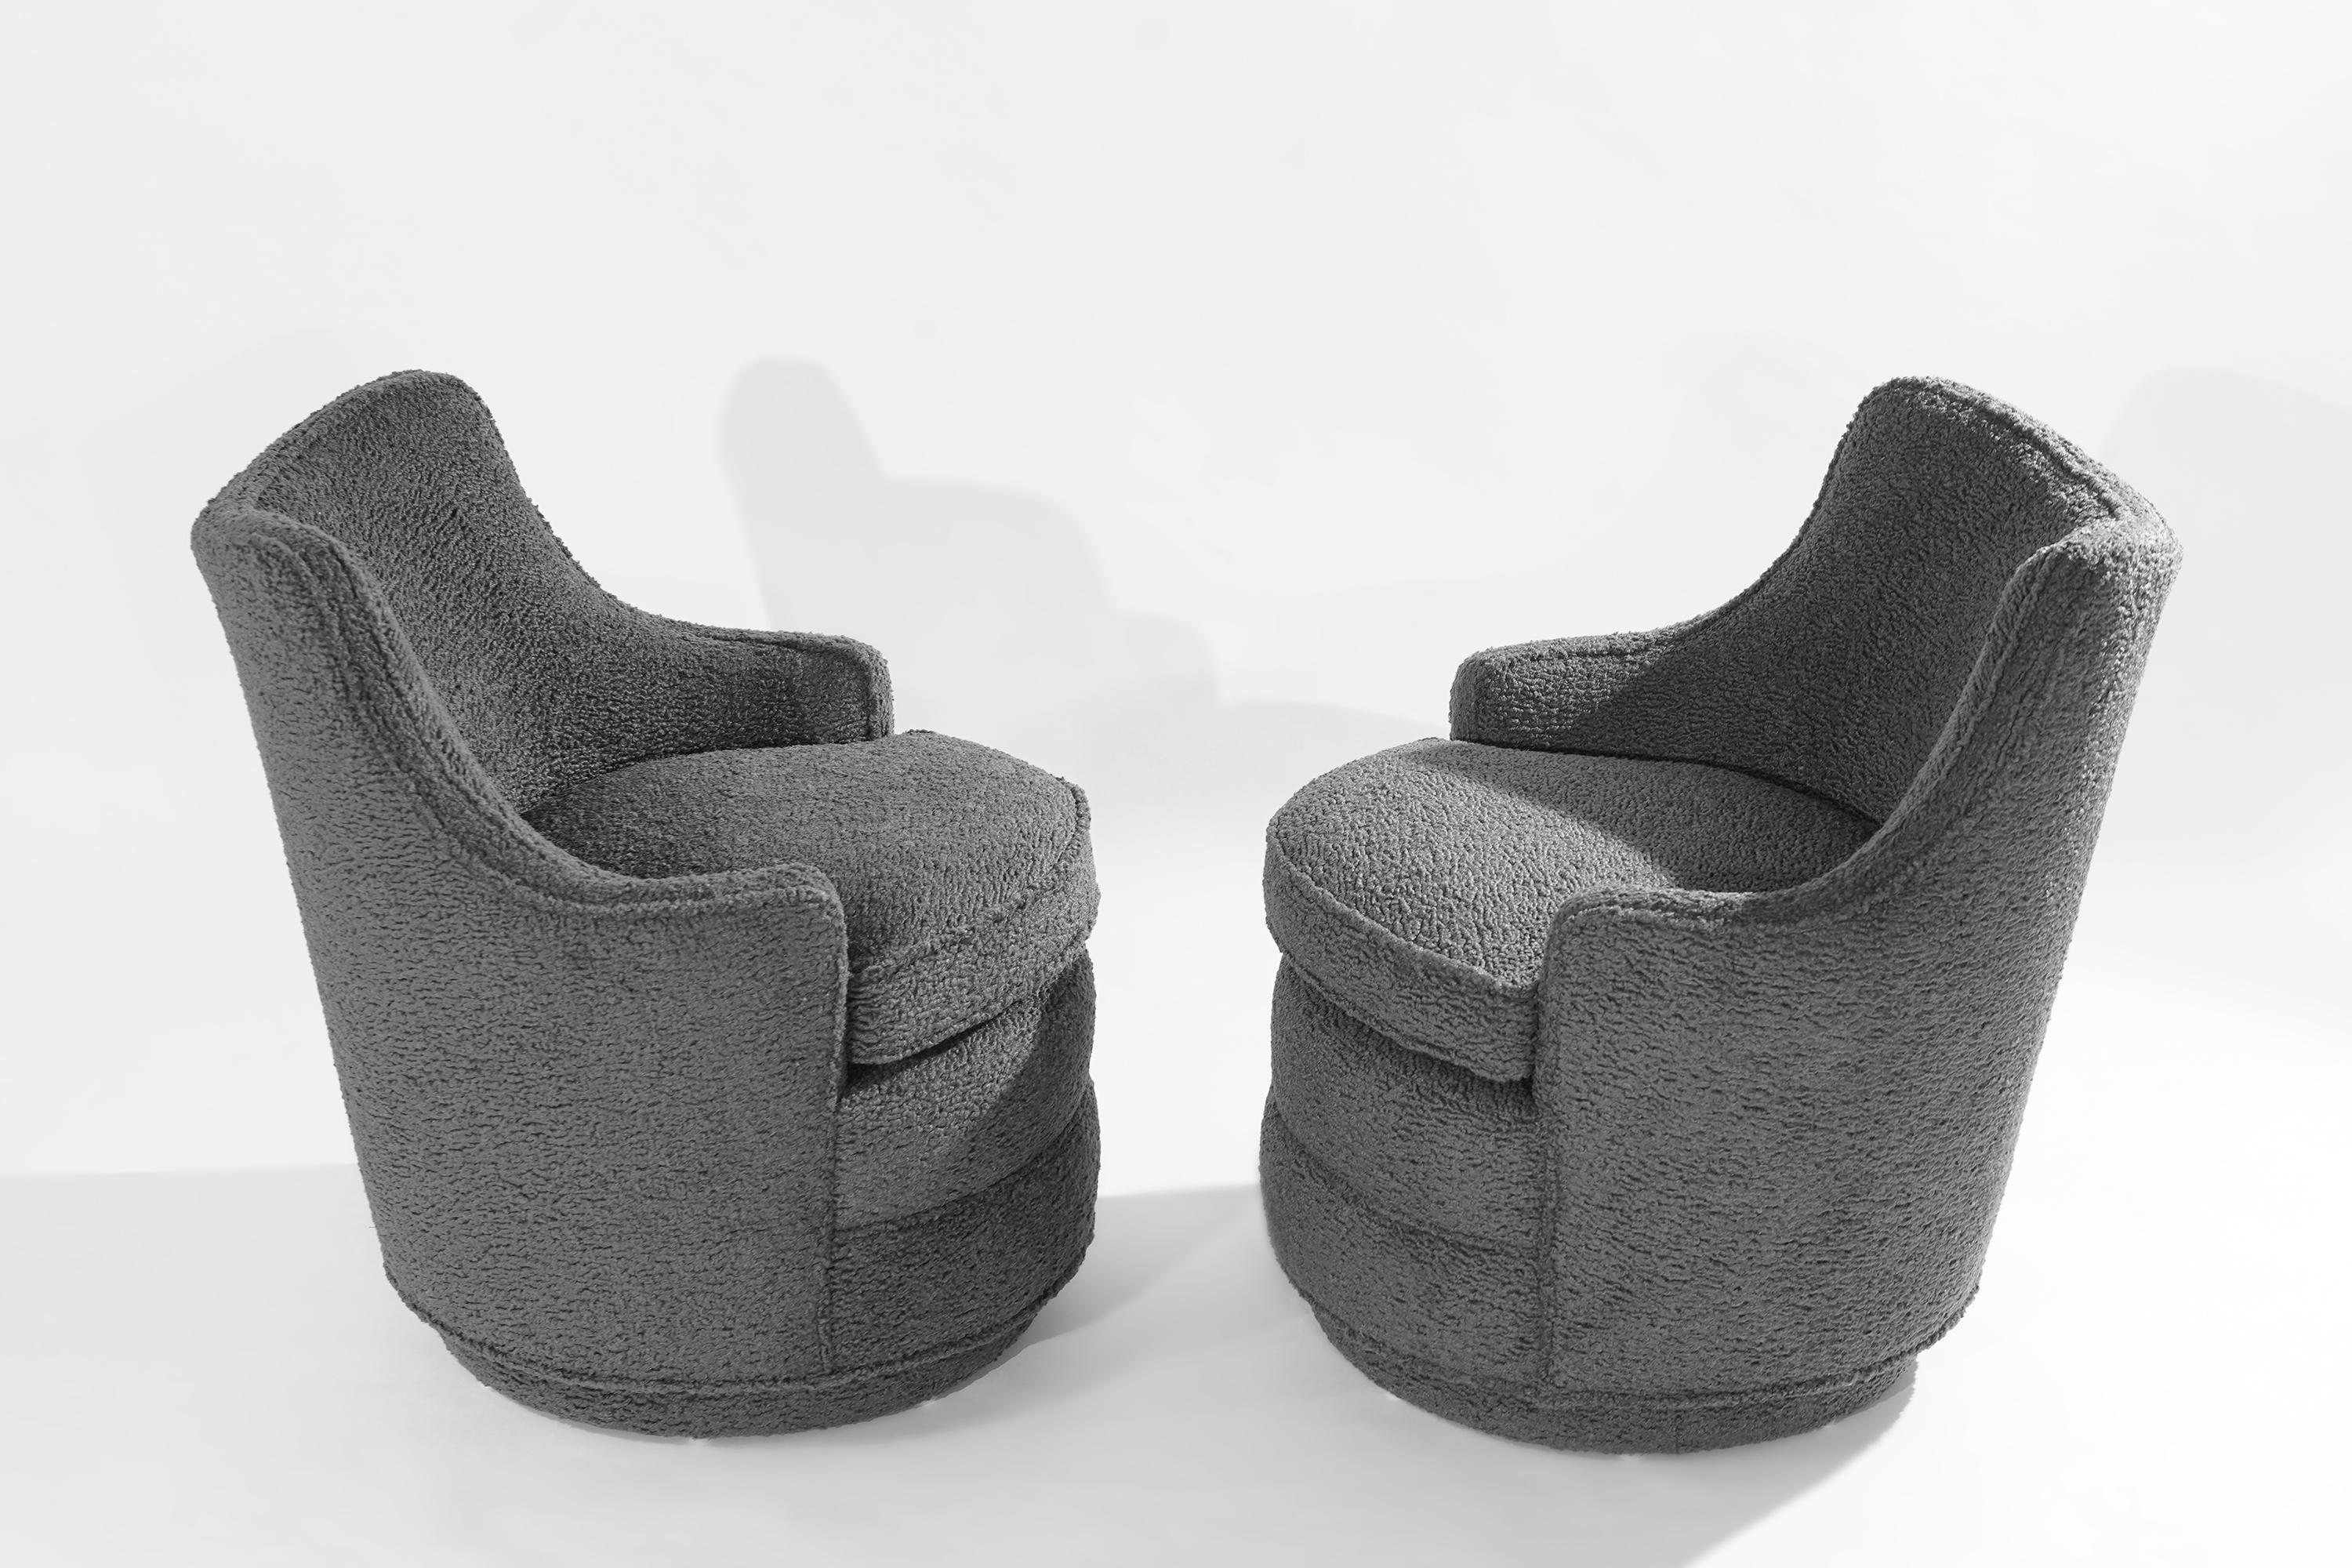 Pair of swivel chairs designed by Edward Wormley for Dunbar circa 1950-1959. Featuring sloping curves, newly upholstered in grey 